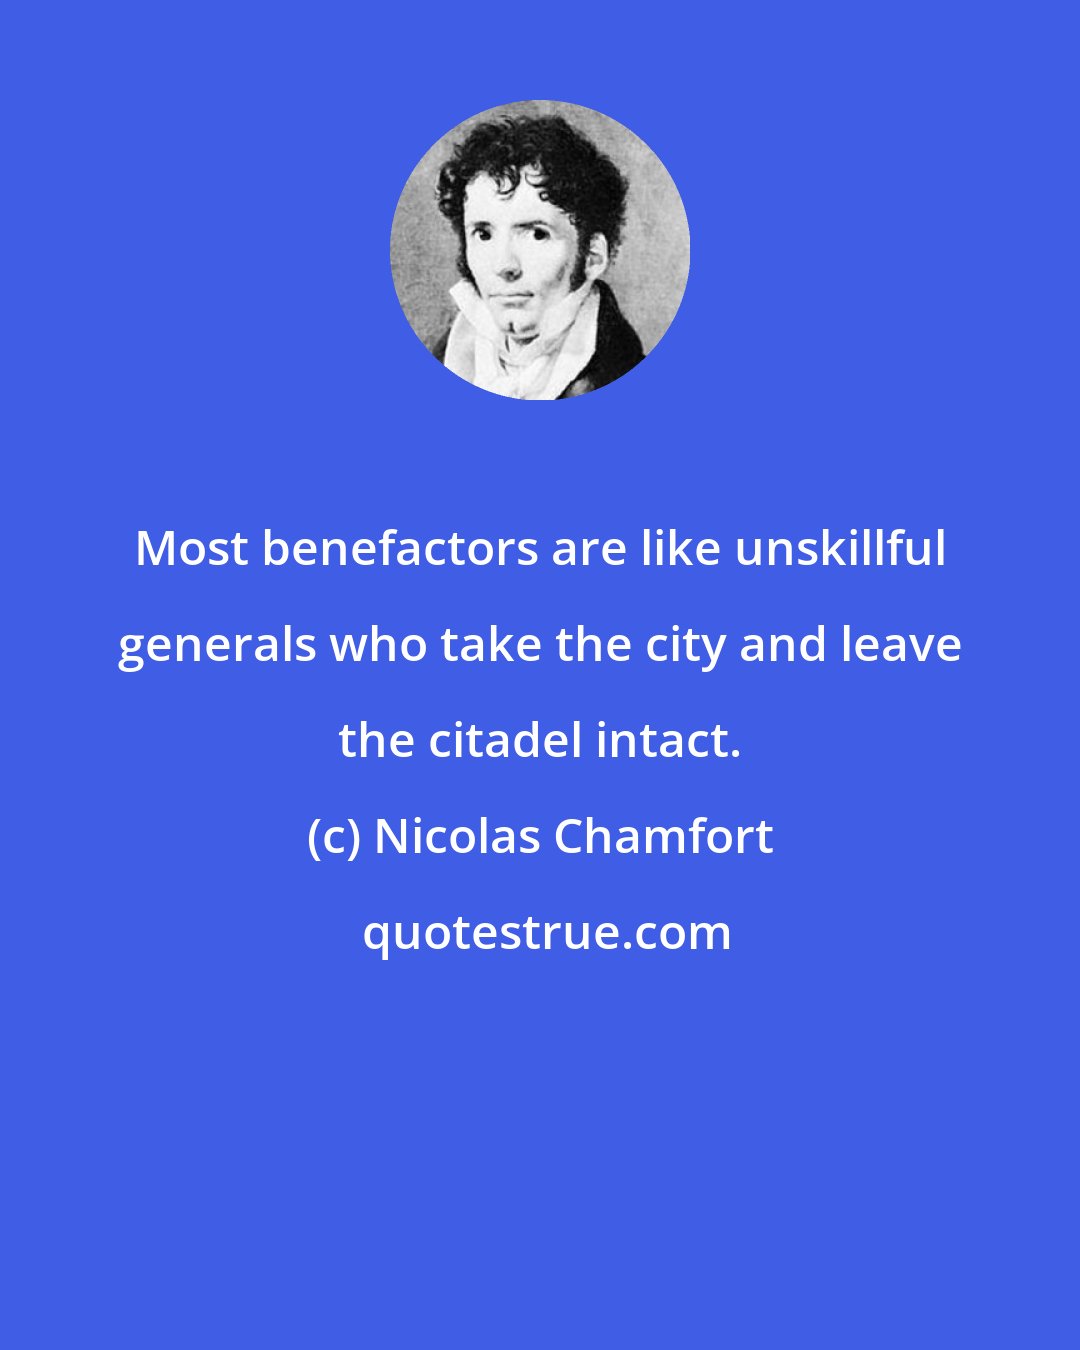 Nicolas Chamfort: Most benefactors are like unskillful generals who take the city and leave the citadel intact.